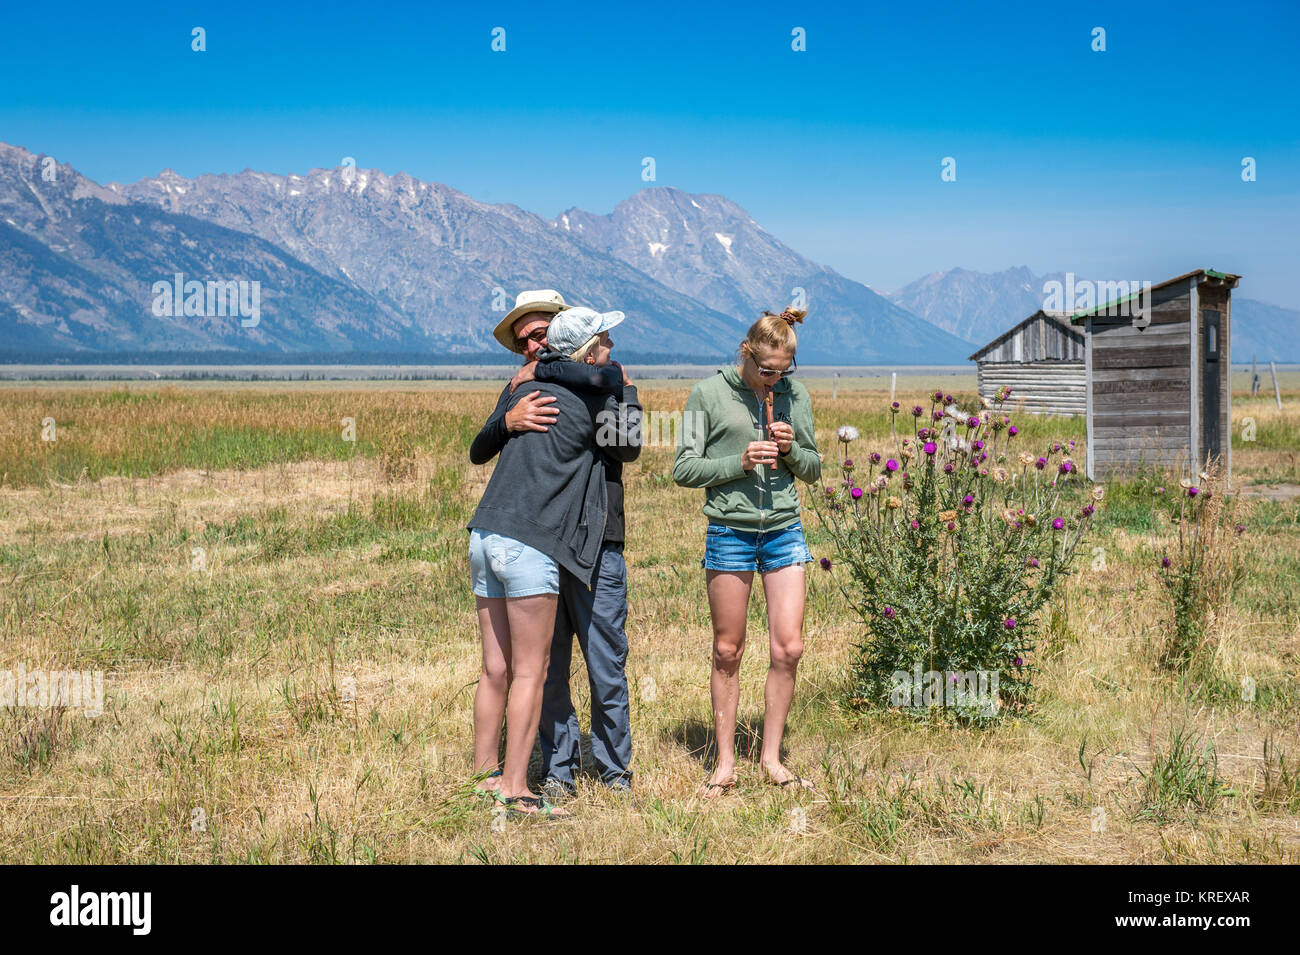 A man hugs a woman lovely while a girl plays a recorder in Jackson Hole, Grand Tetons National Park, Teton County, Wyoming Stock Photo